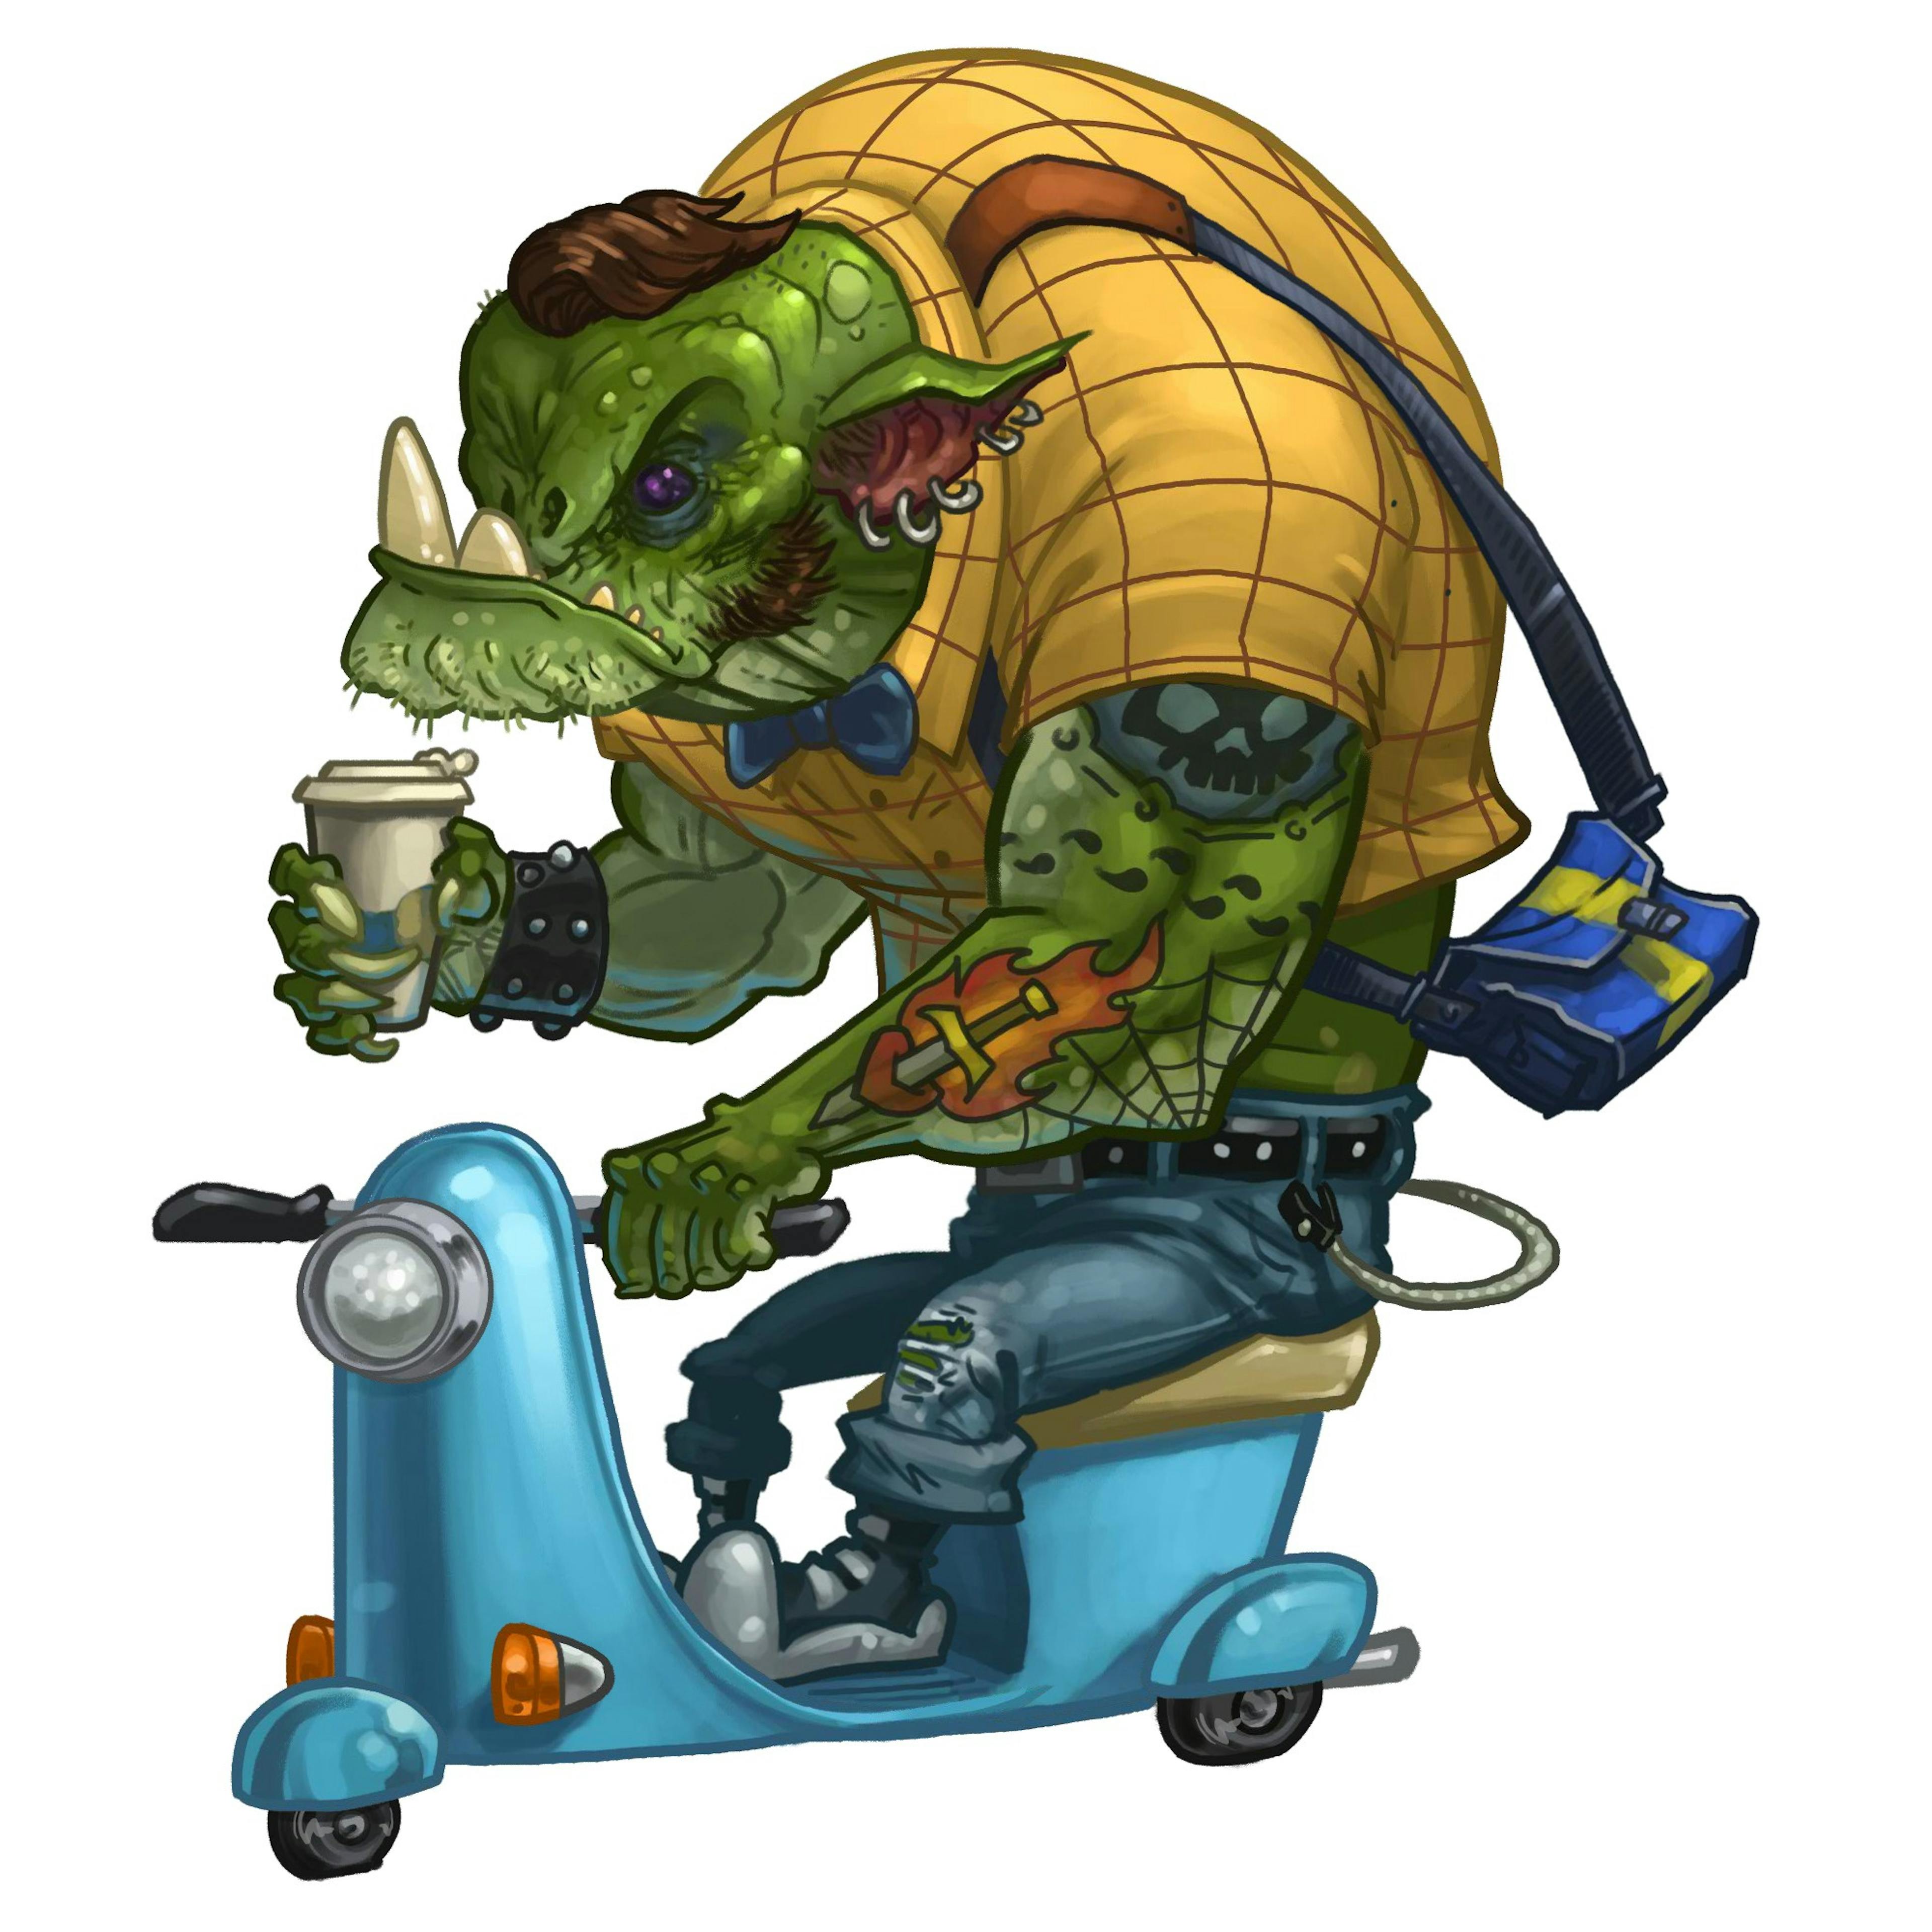 A goblin on a scooter